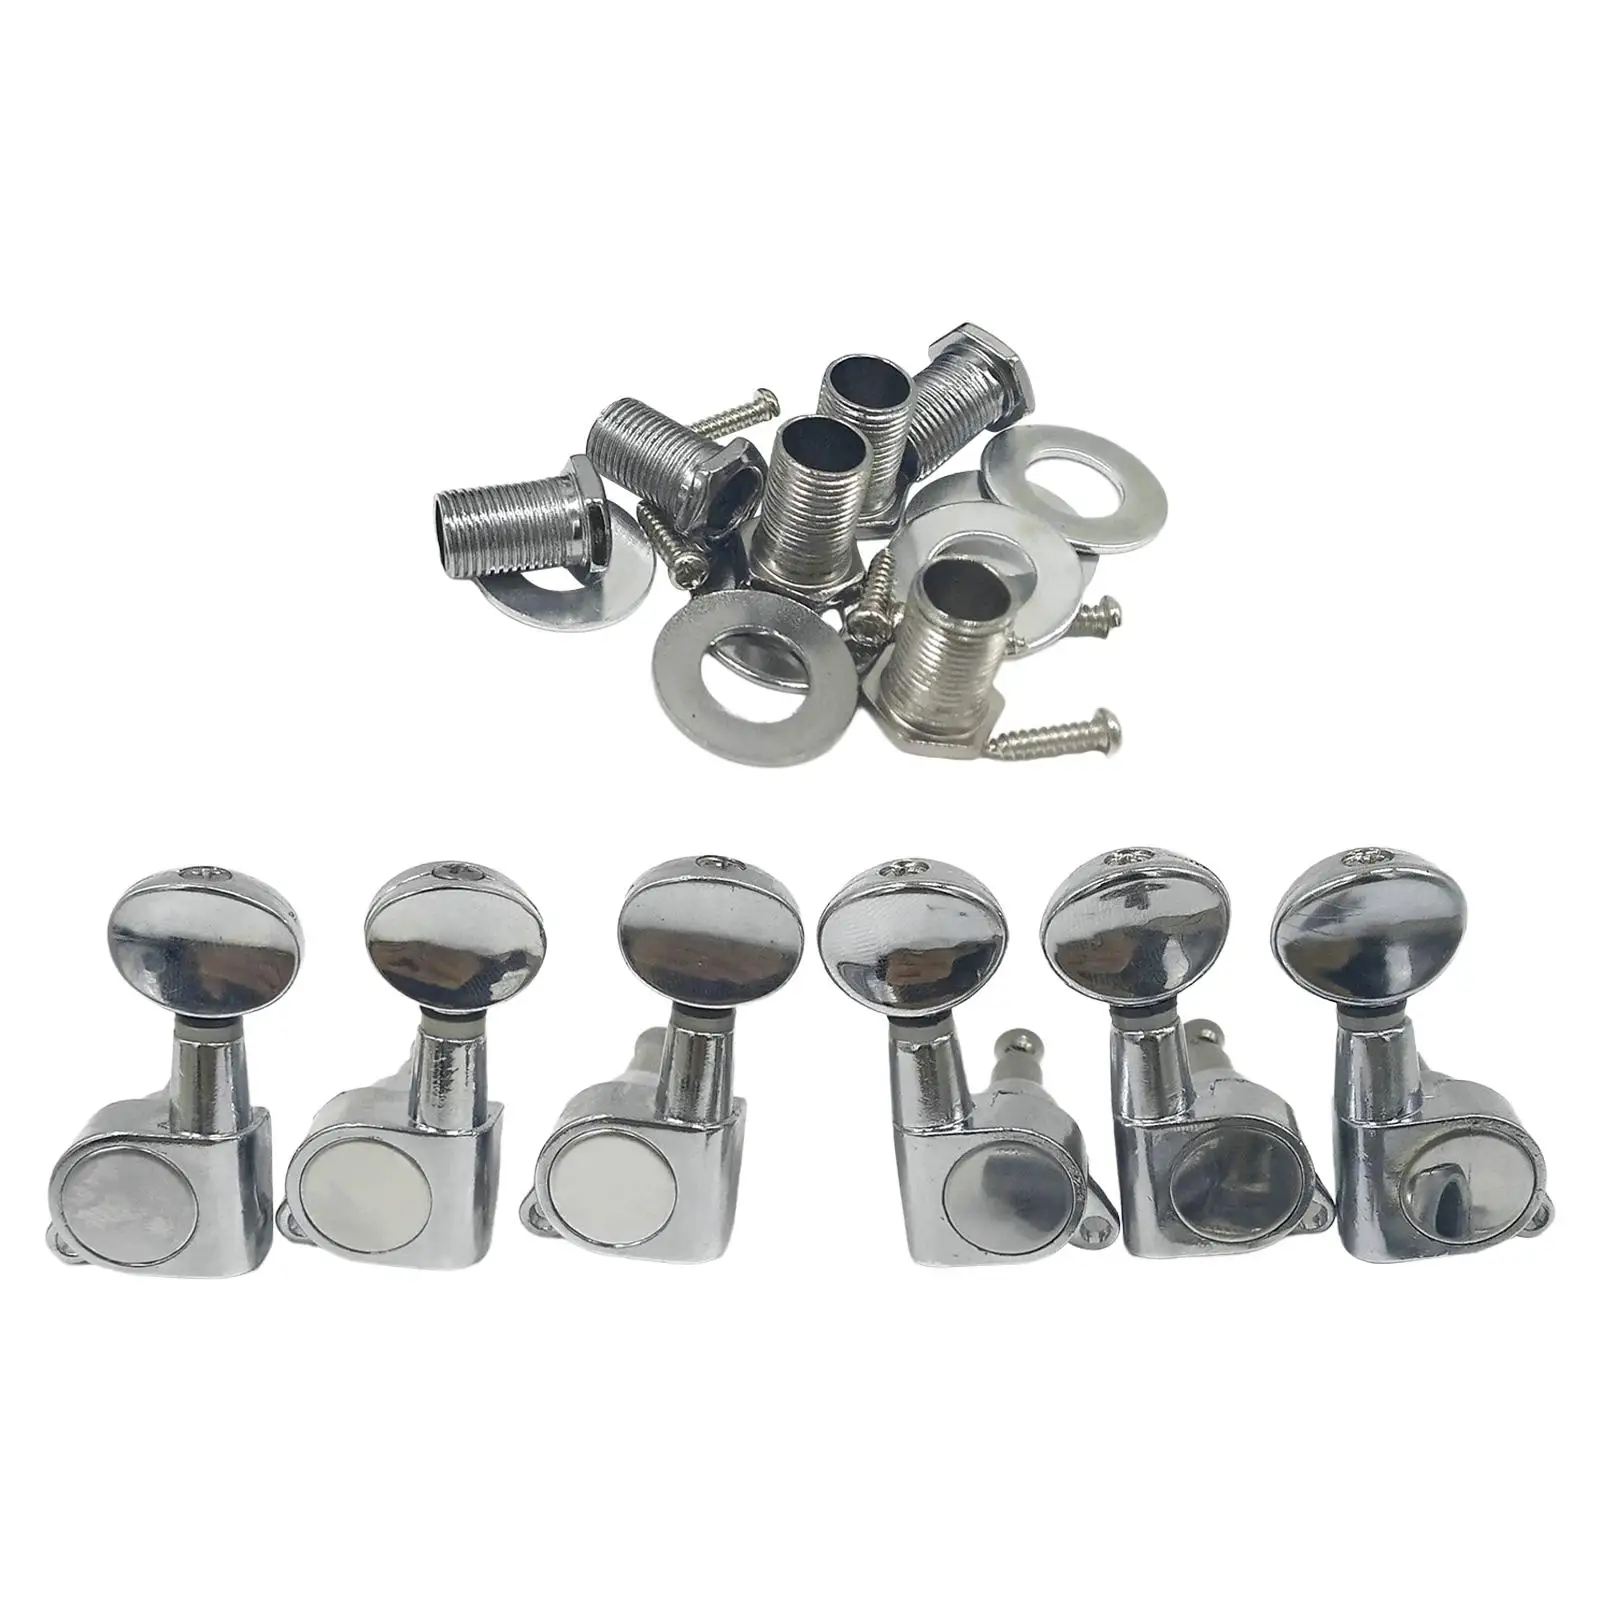 6x Guitar Tuning Peg Tuner Key Peg Knobs Tuners with Nuts Gaskets Machine Head for Acoustic Electric Guitar Replacement Parts